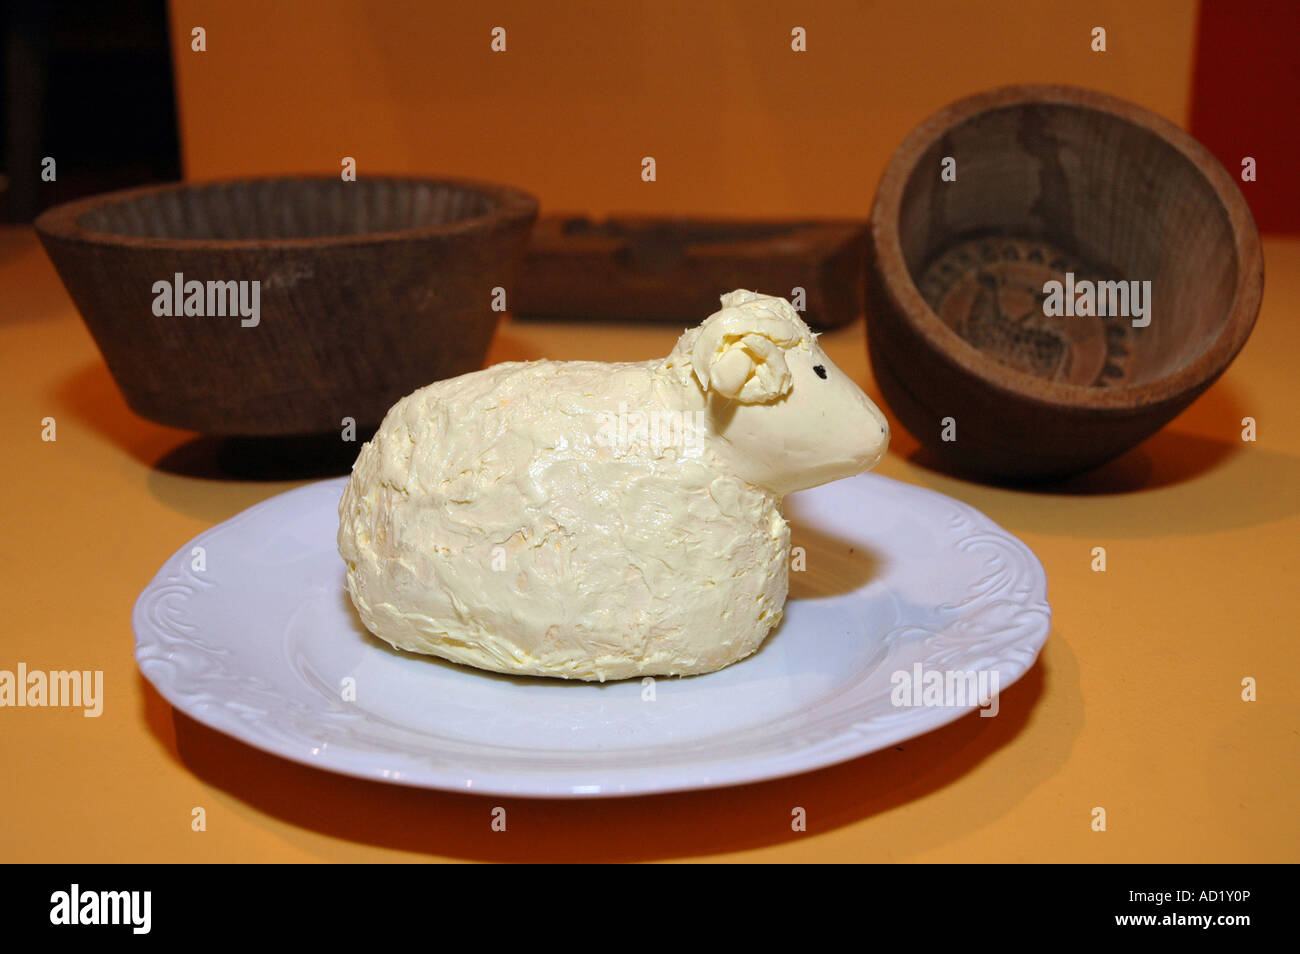 https://c8.alamy.com/comp/AD1Y0P/old-wooden-polish-butter-mold-and-plastic-sheep-looks-like-made-of-AD1Y0P.jpg